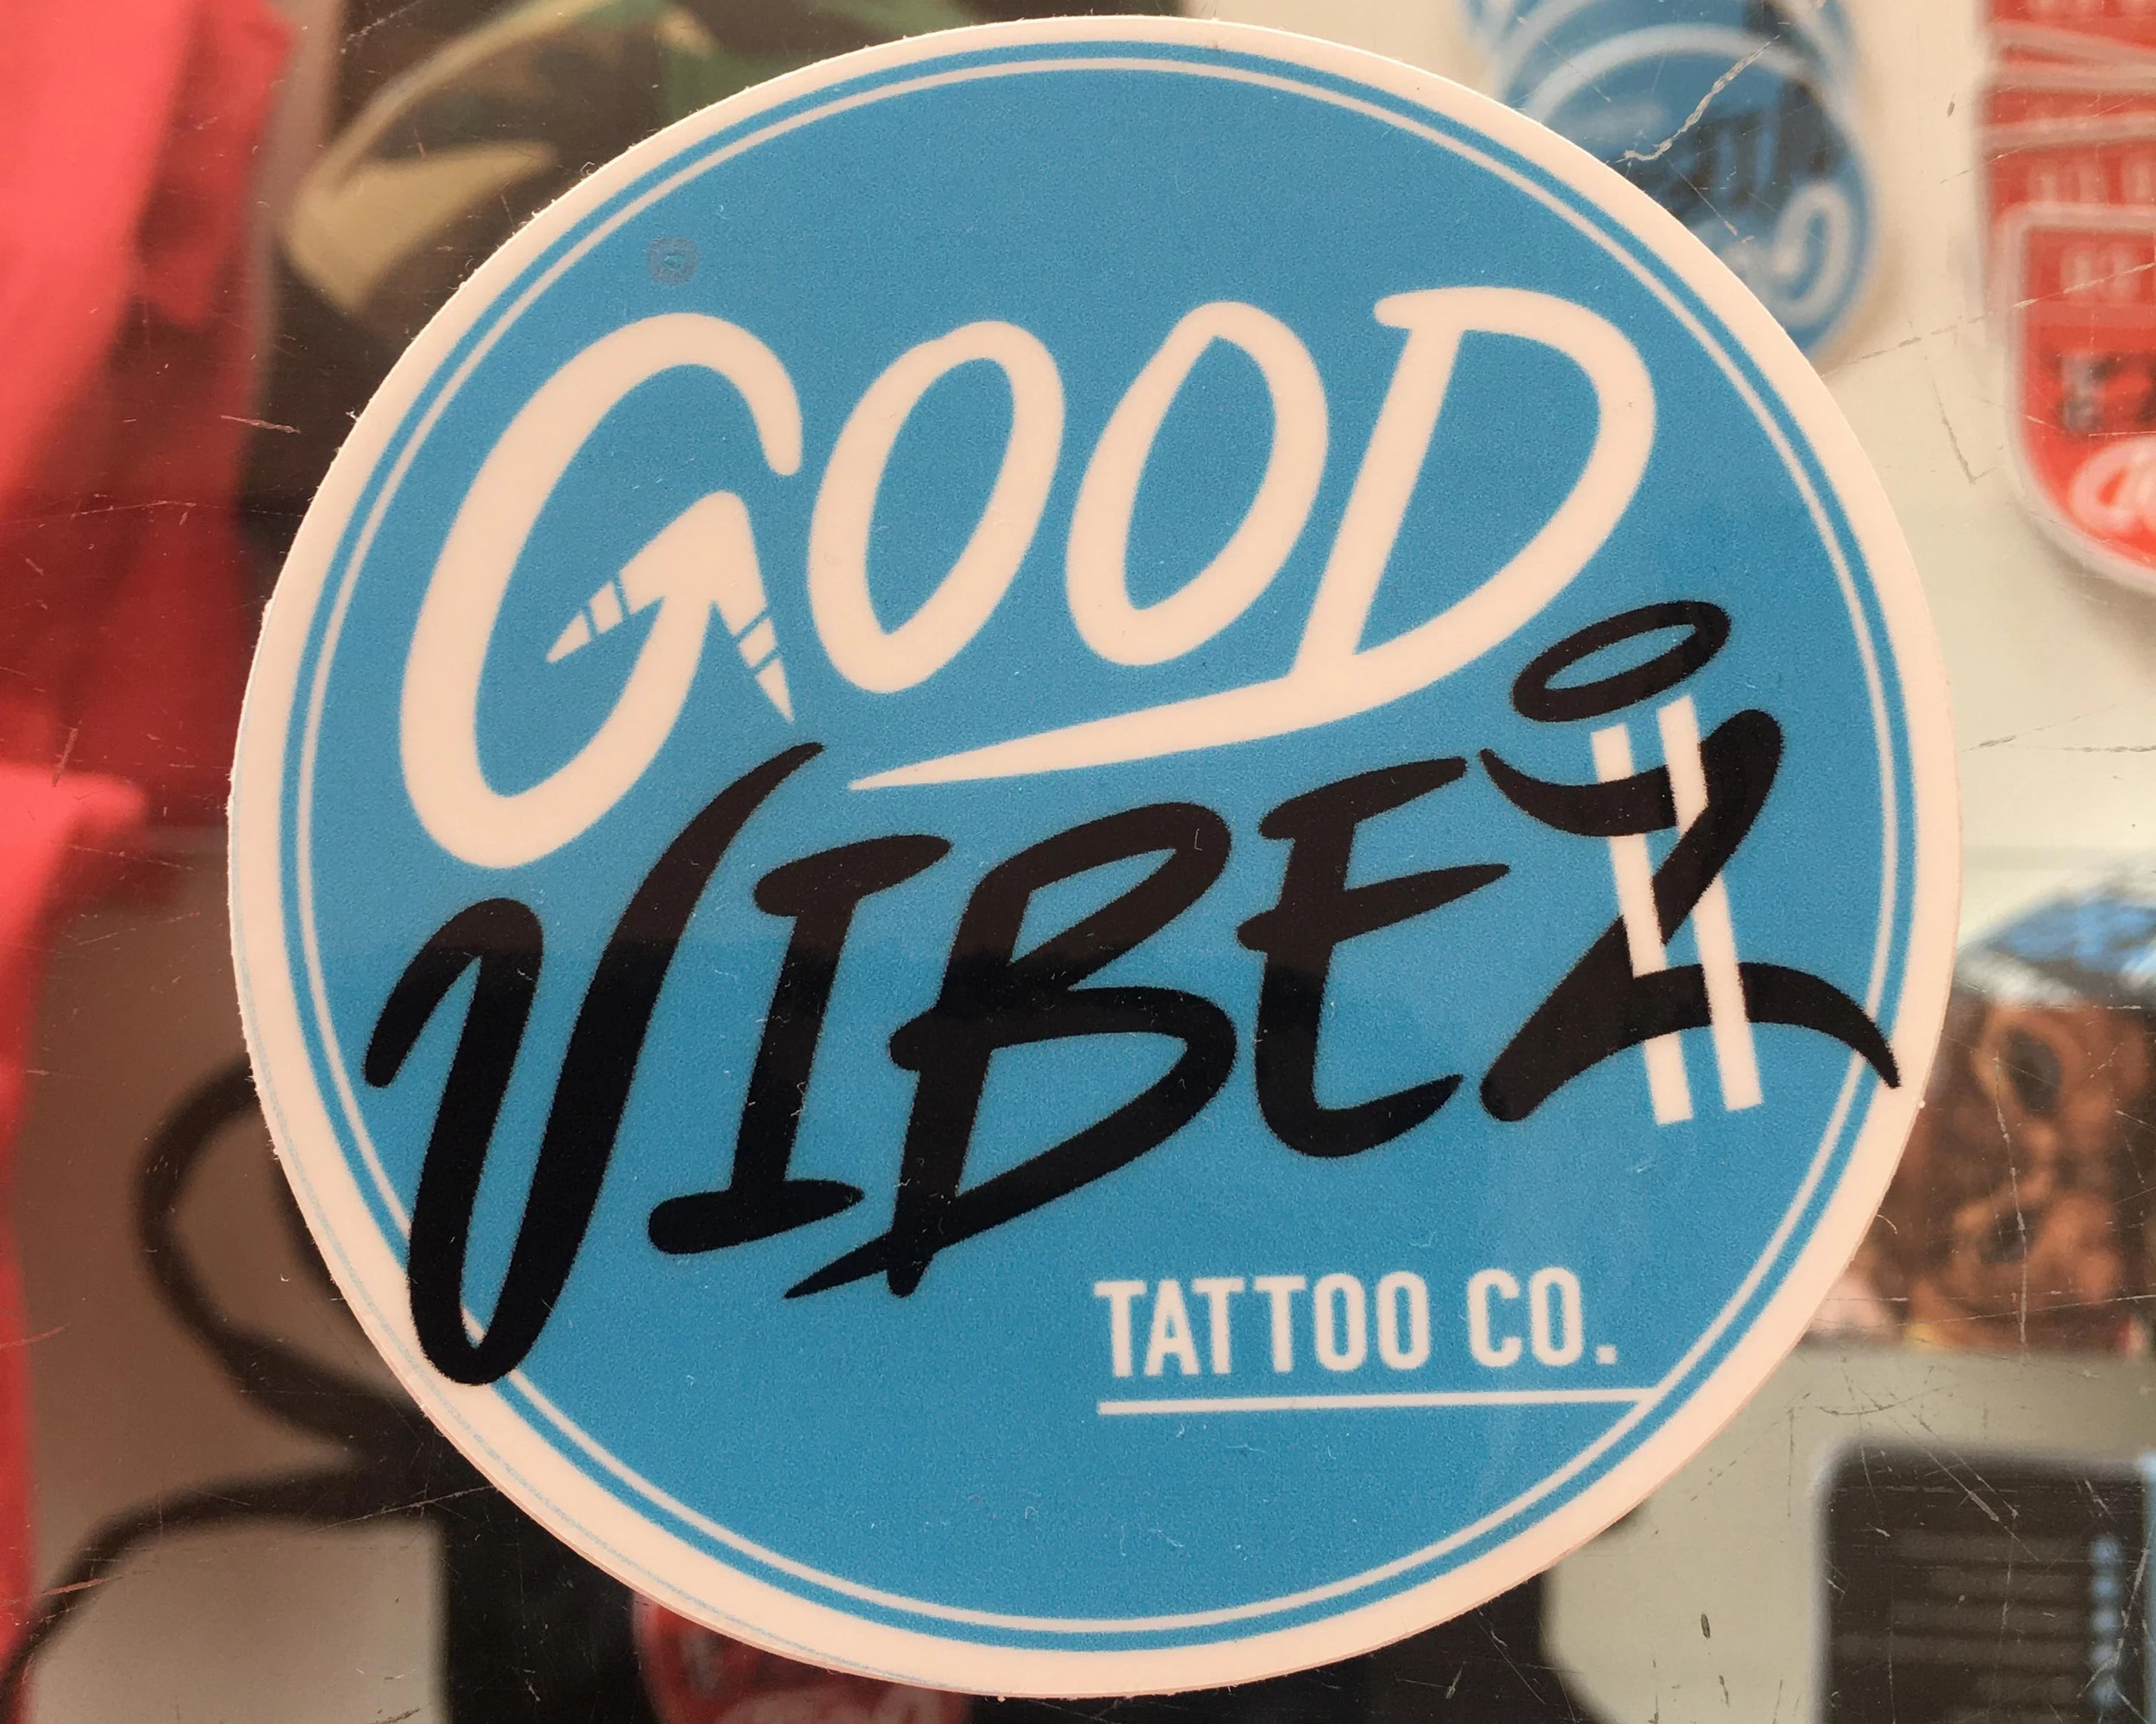 Good Vibes by Jaden Belle at Zombie Tattoo Joe in Fort Worth, TX : r/tattoos